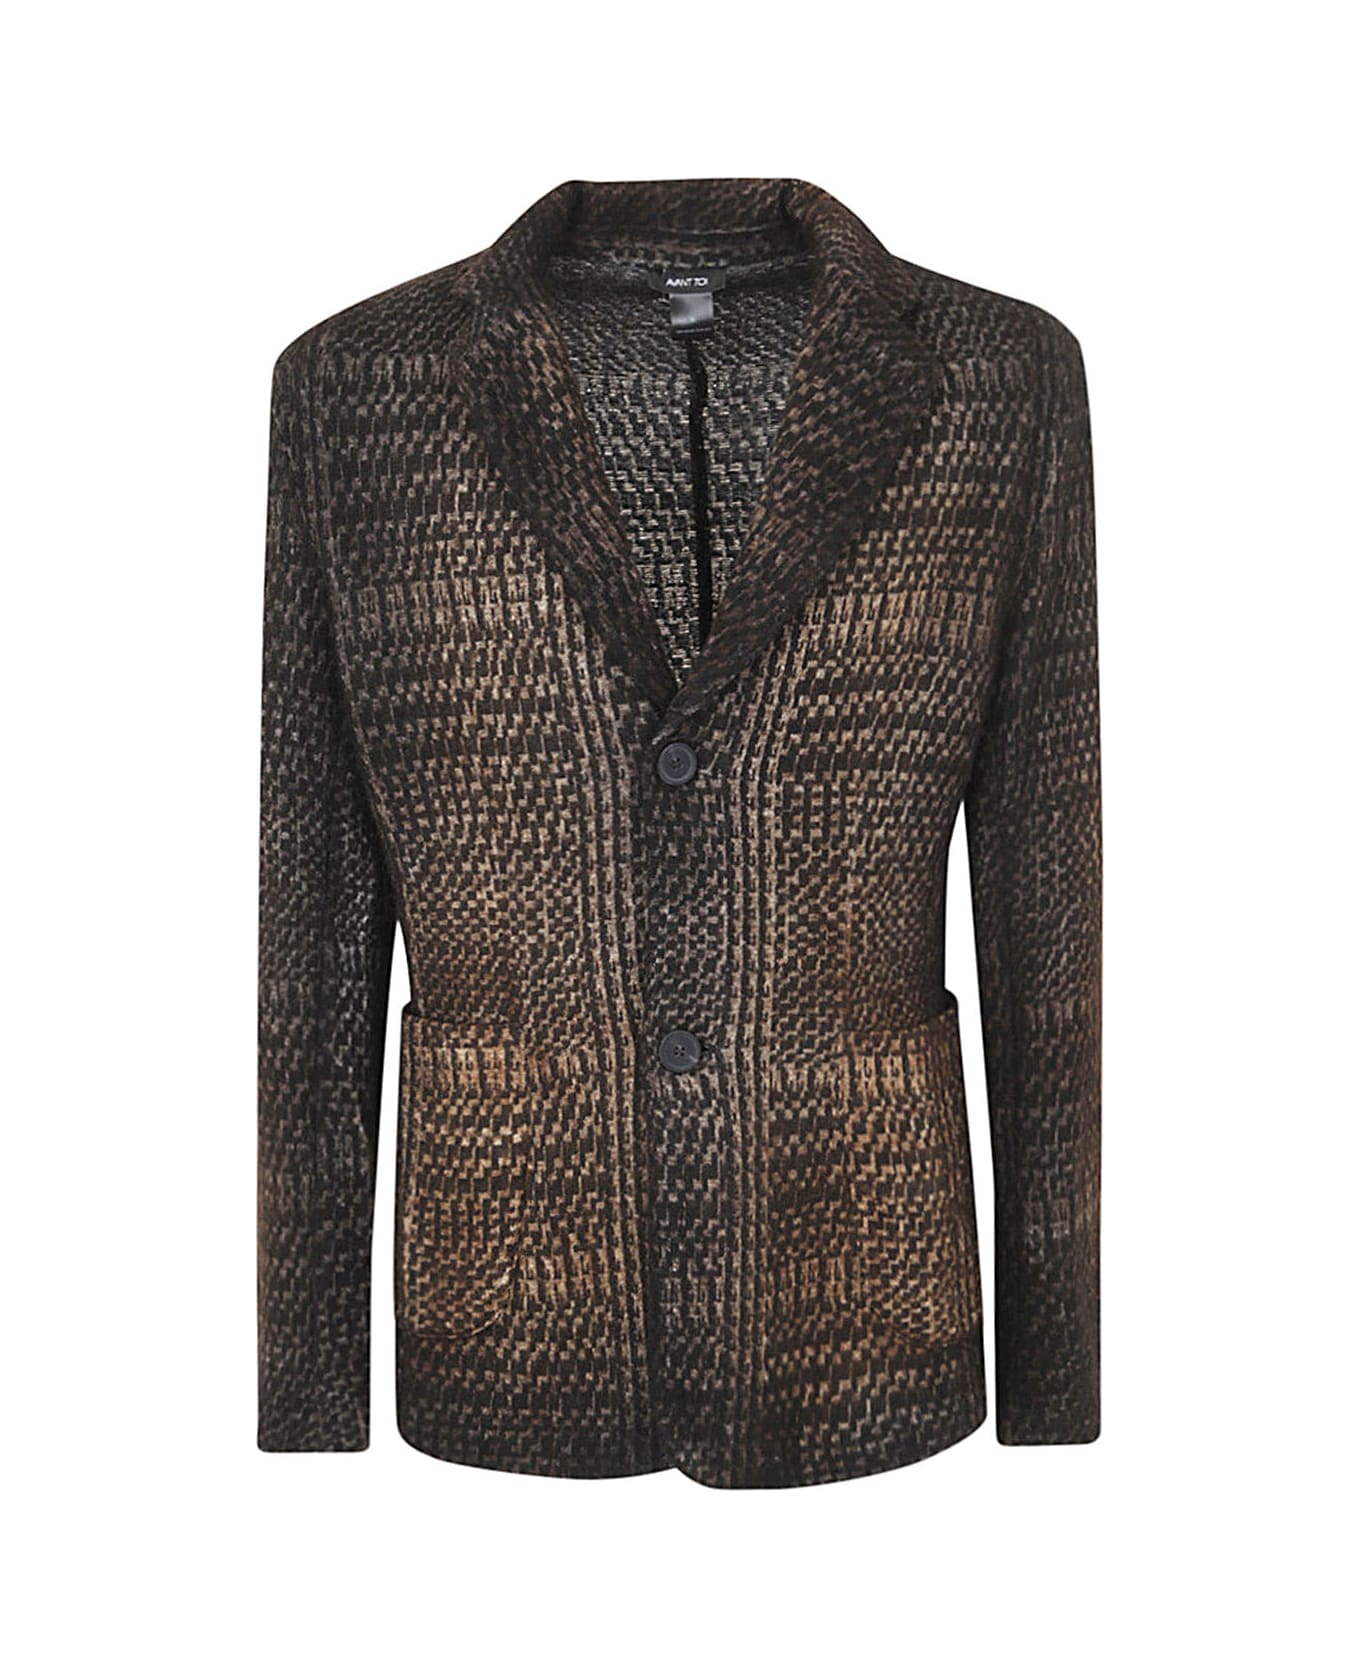 Avant Toi Prince Of Wales Jacquard Rever Jacket With Shadows - Cork カーディガン